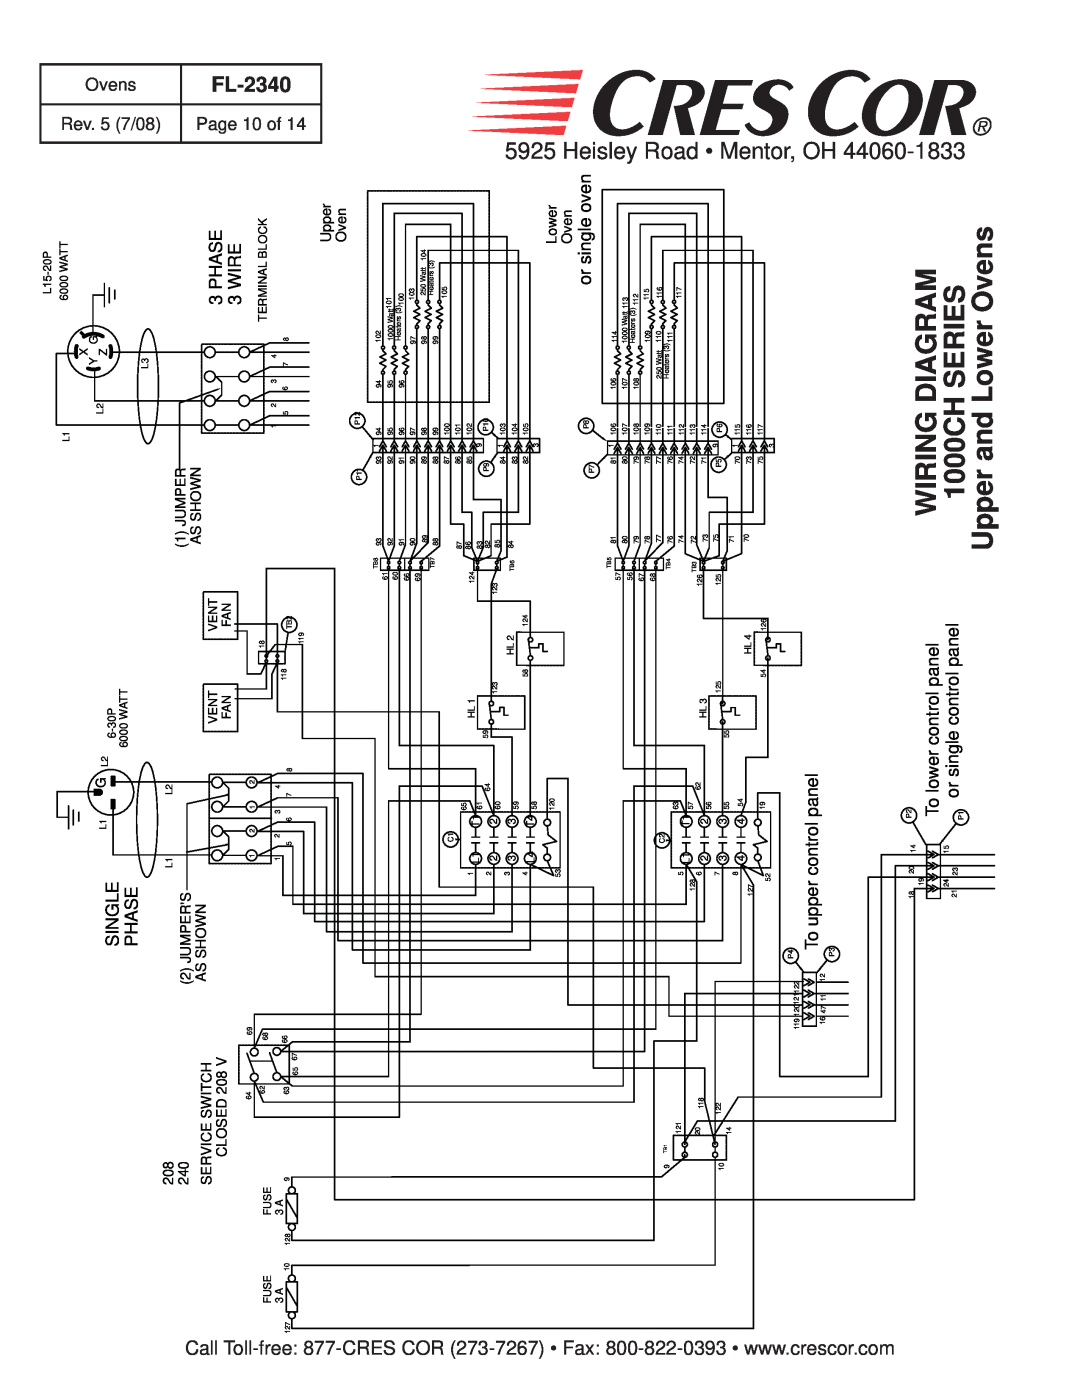 Cres Cor 1000-CH-AL Wiring Diagram, 1000CH SERIES, Upper and Lower Ovens, FL-2340, Single, Phase, Wire, or single oven 